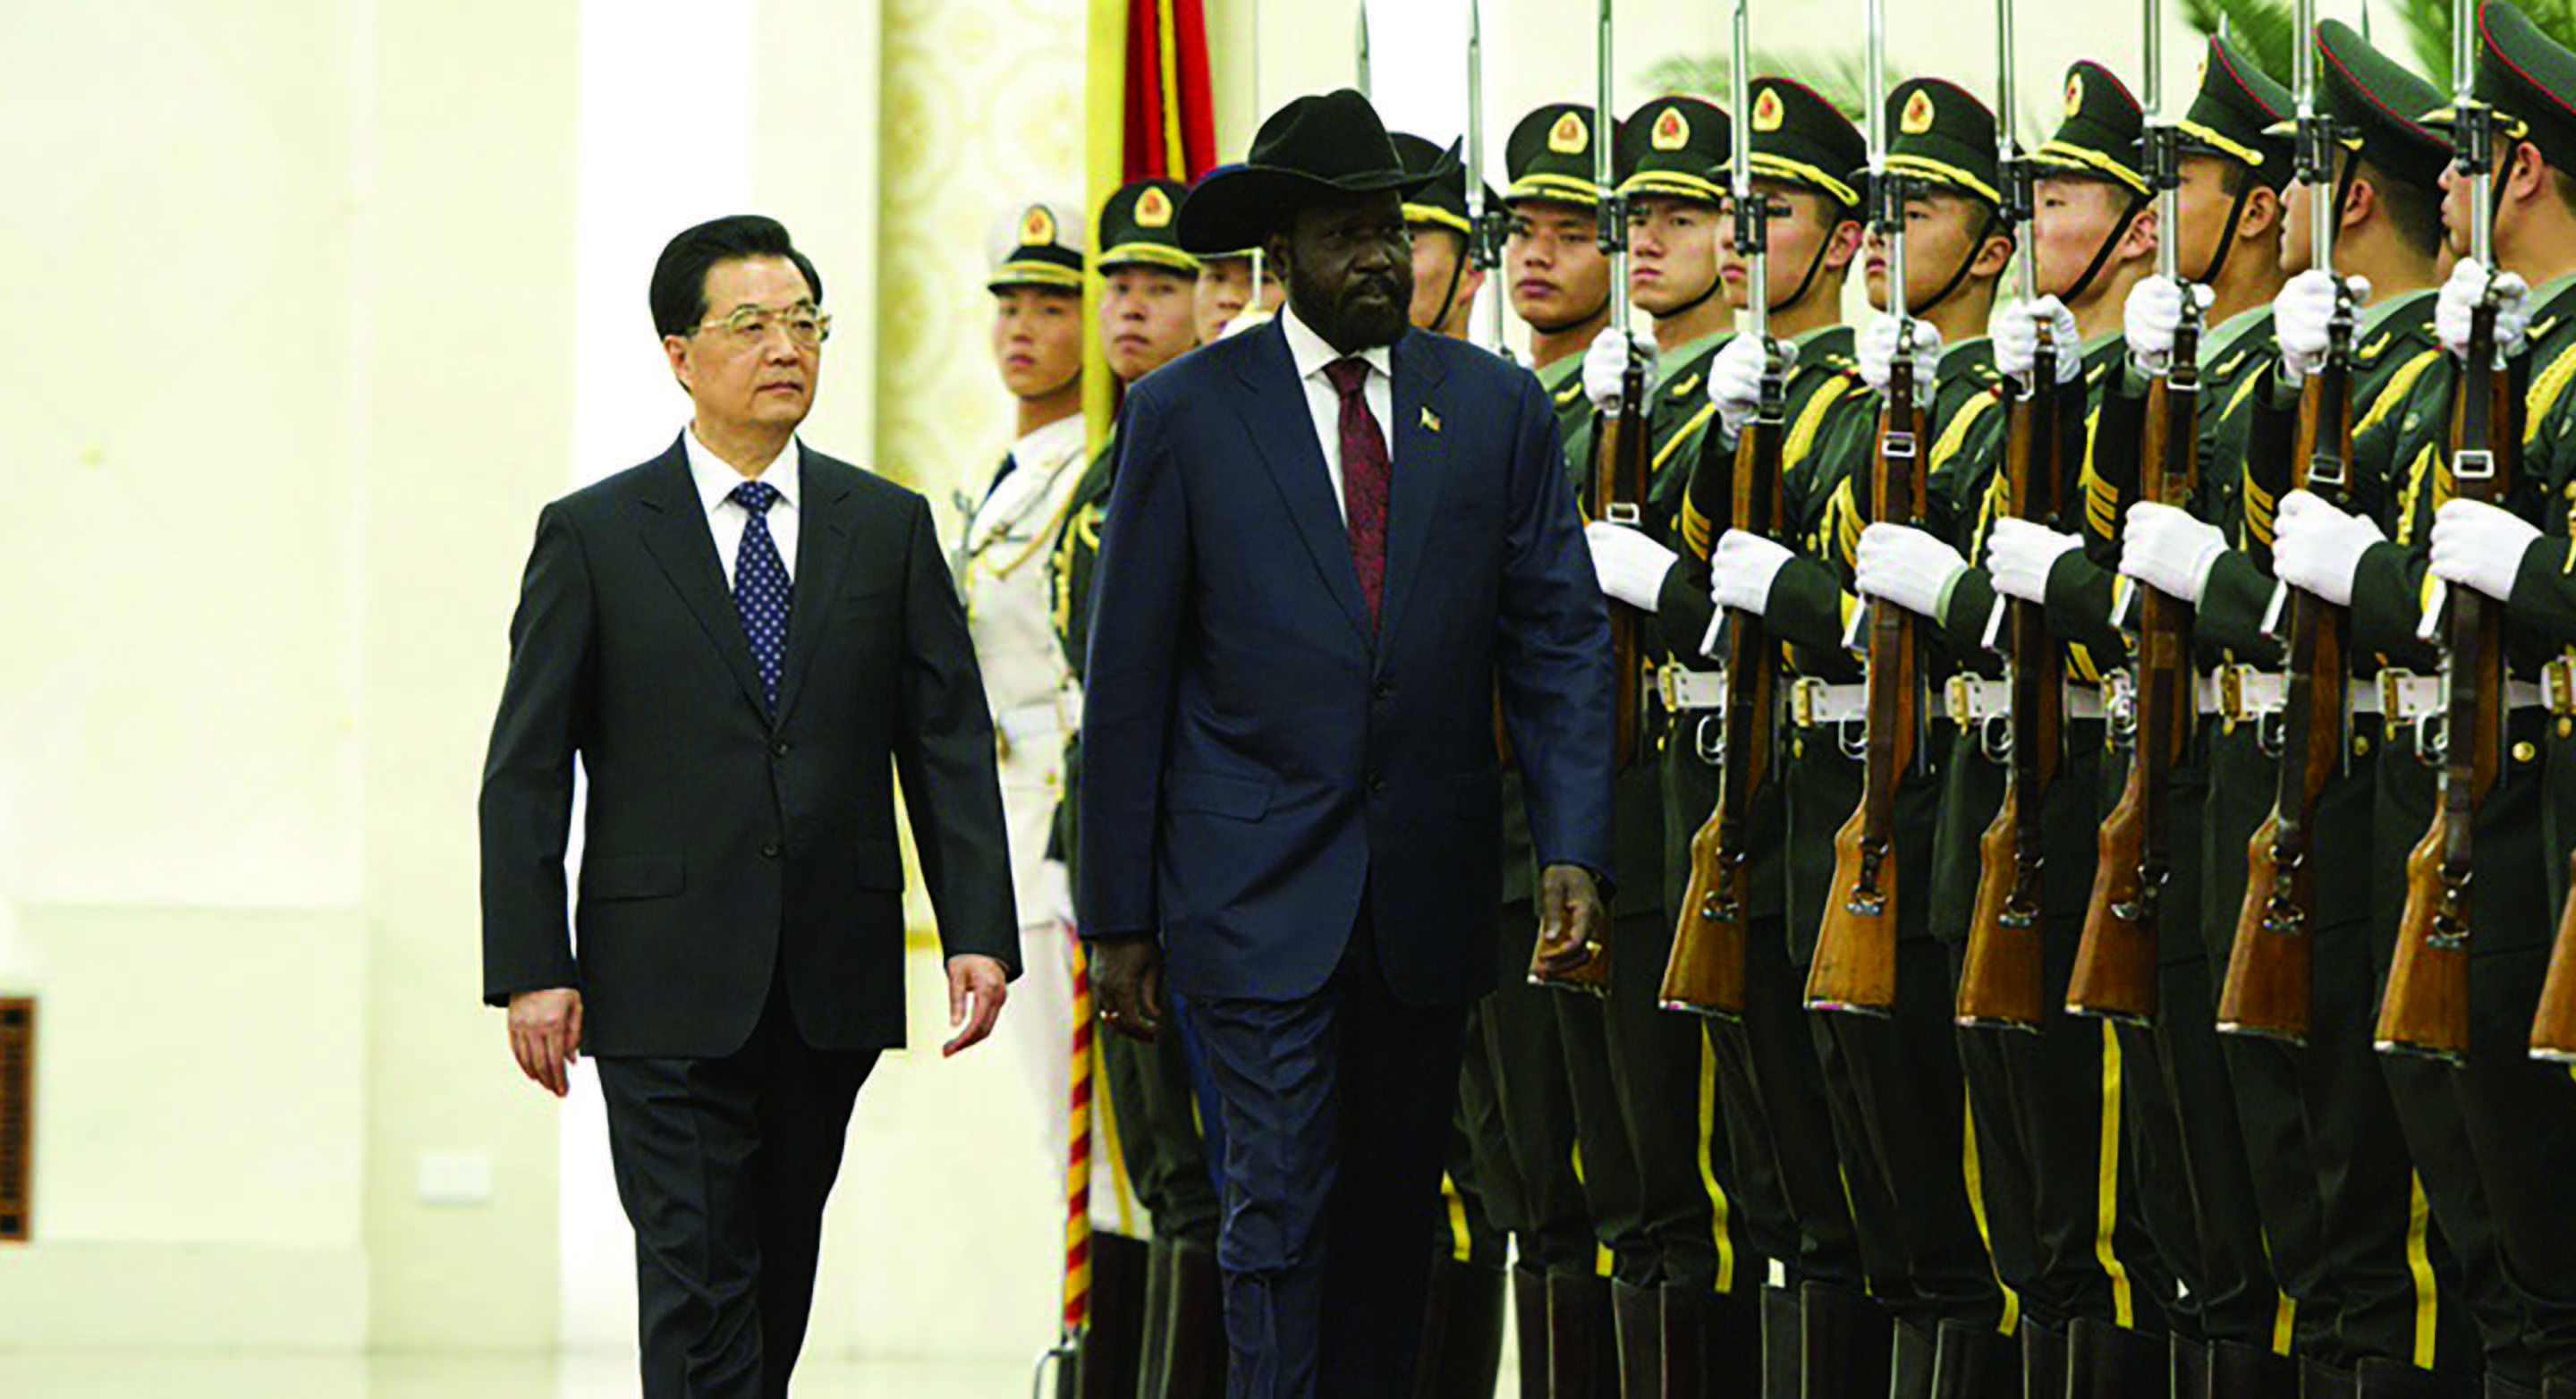 Chinese President Hu Jintao welcomes South Sudanese President Salva Kiir Mayardit at the Great Hall of the People in Beijing, April 24, 2012. (Xinhua)